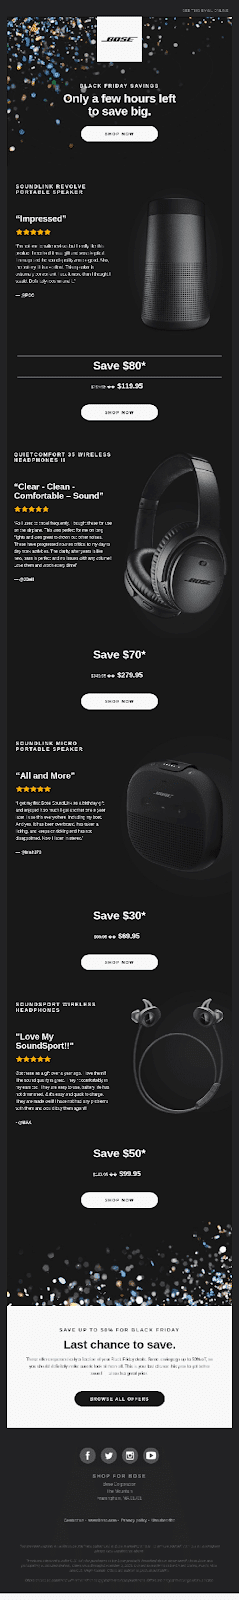 Bose email example